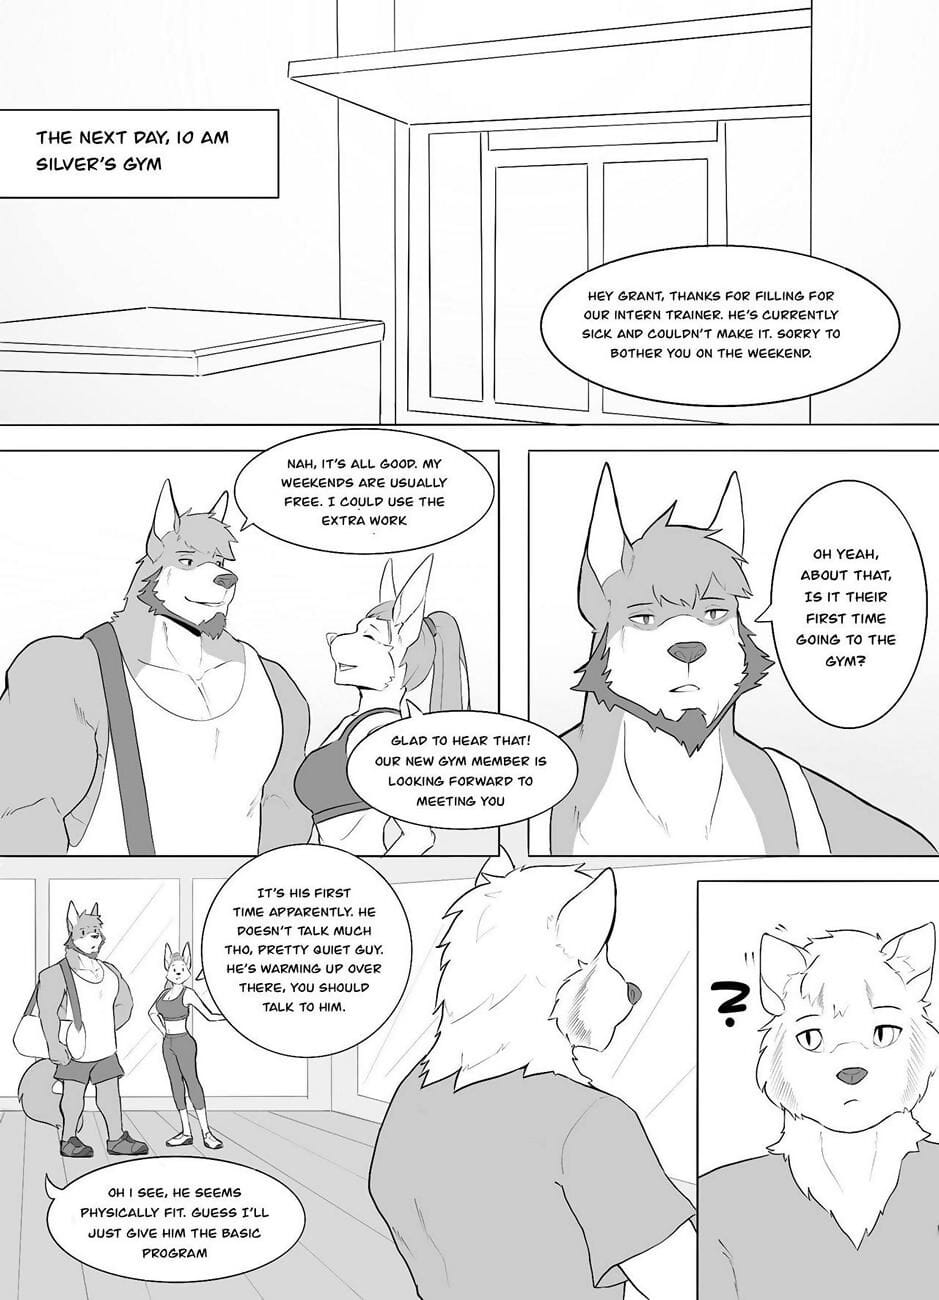 Our Differences - part 2 page 1